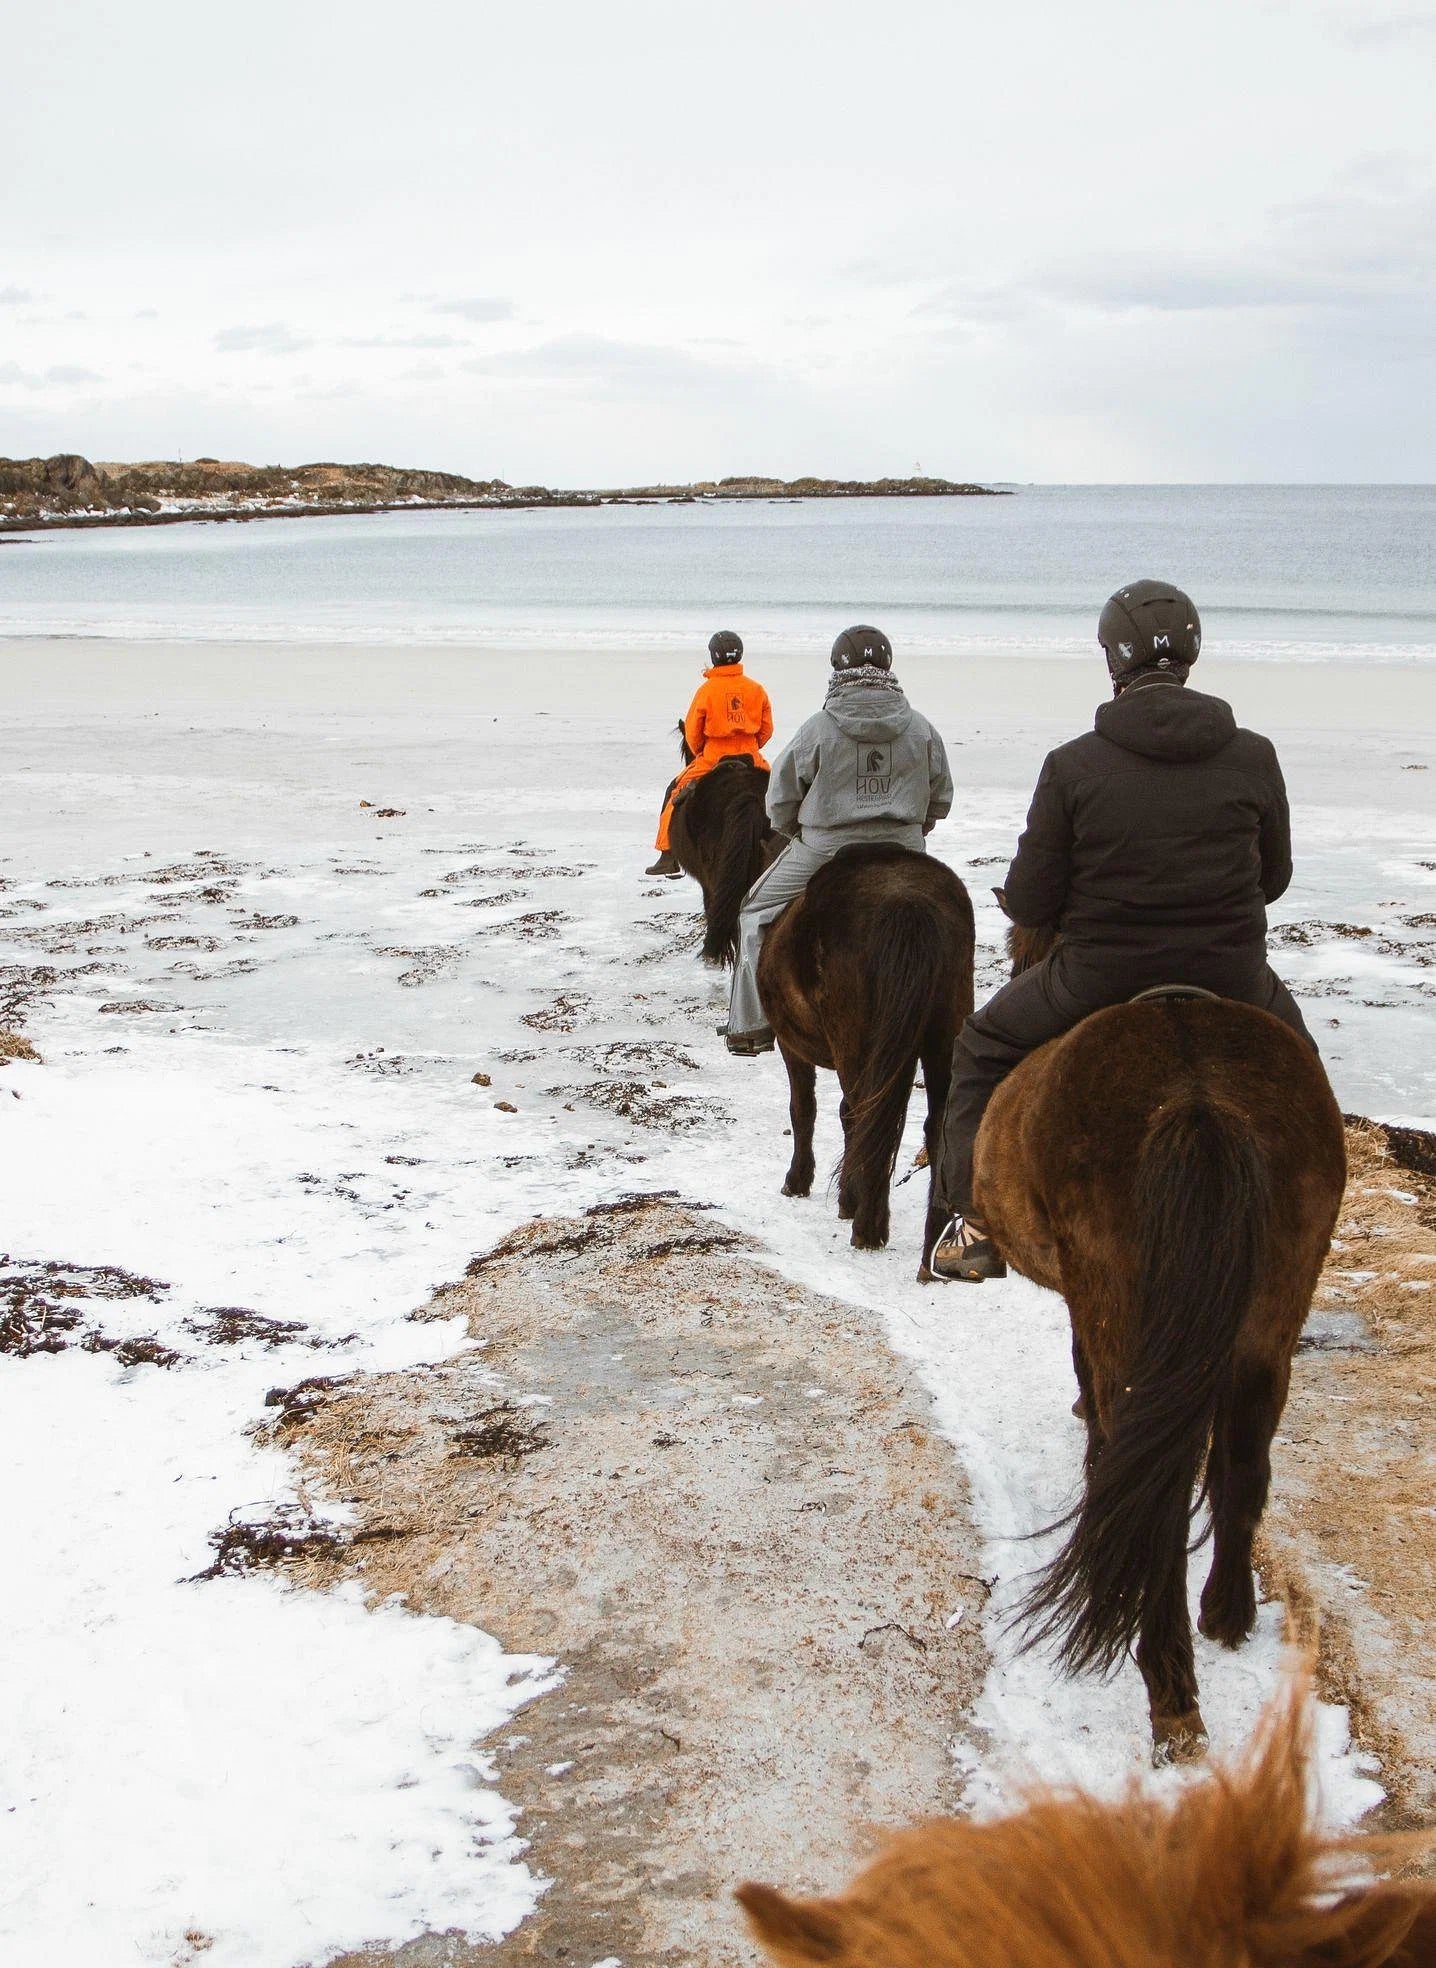 Three small group trip participants riding horses along the snowy beach in Lofoten Norway. 